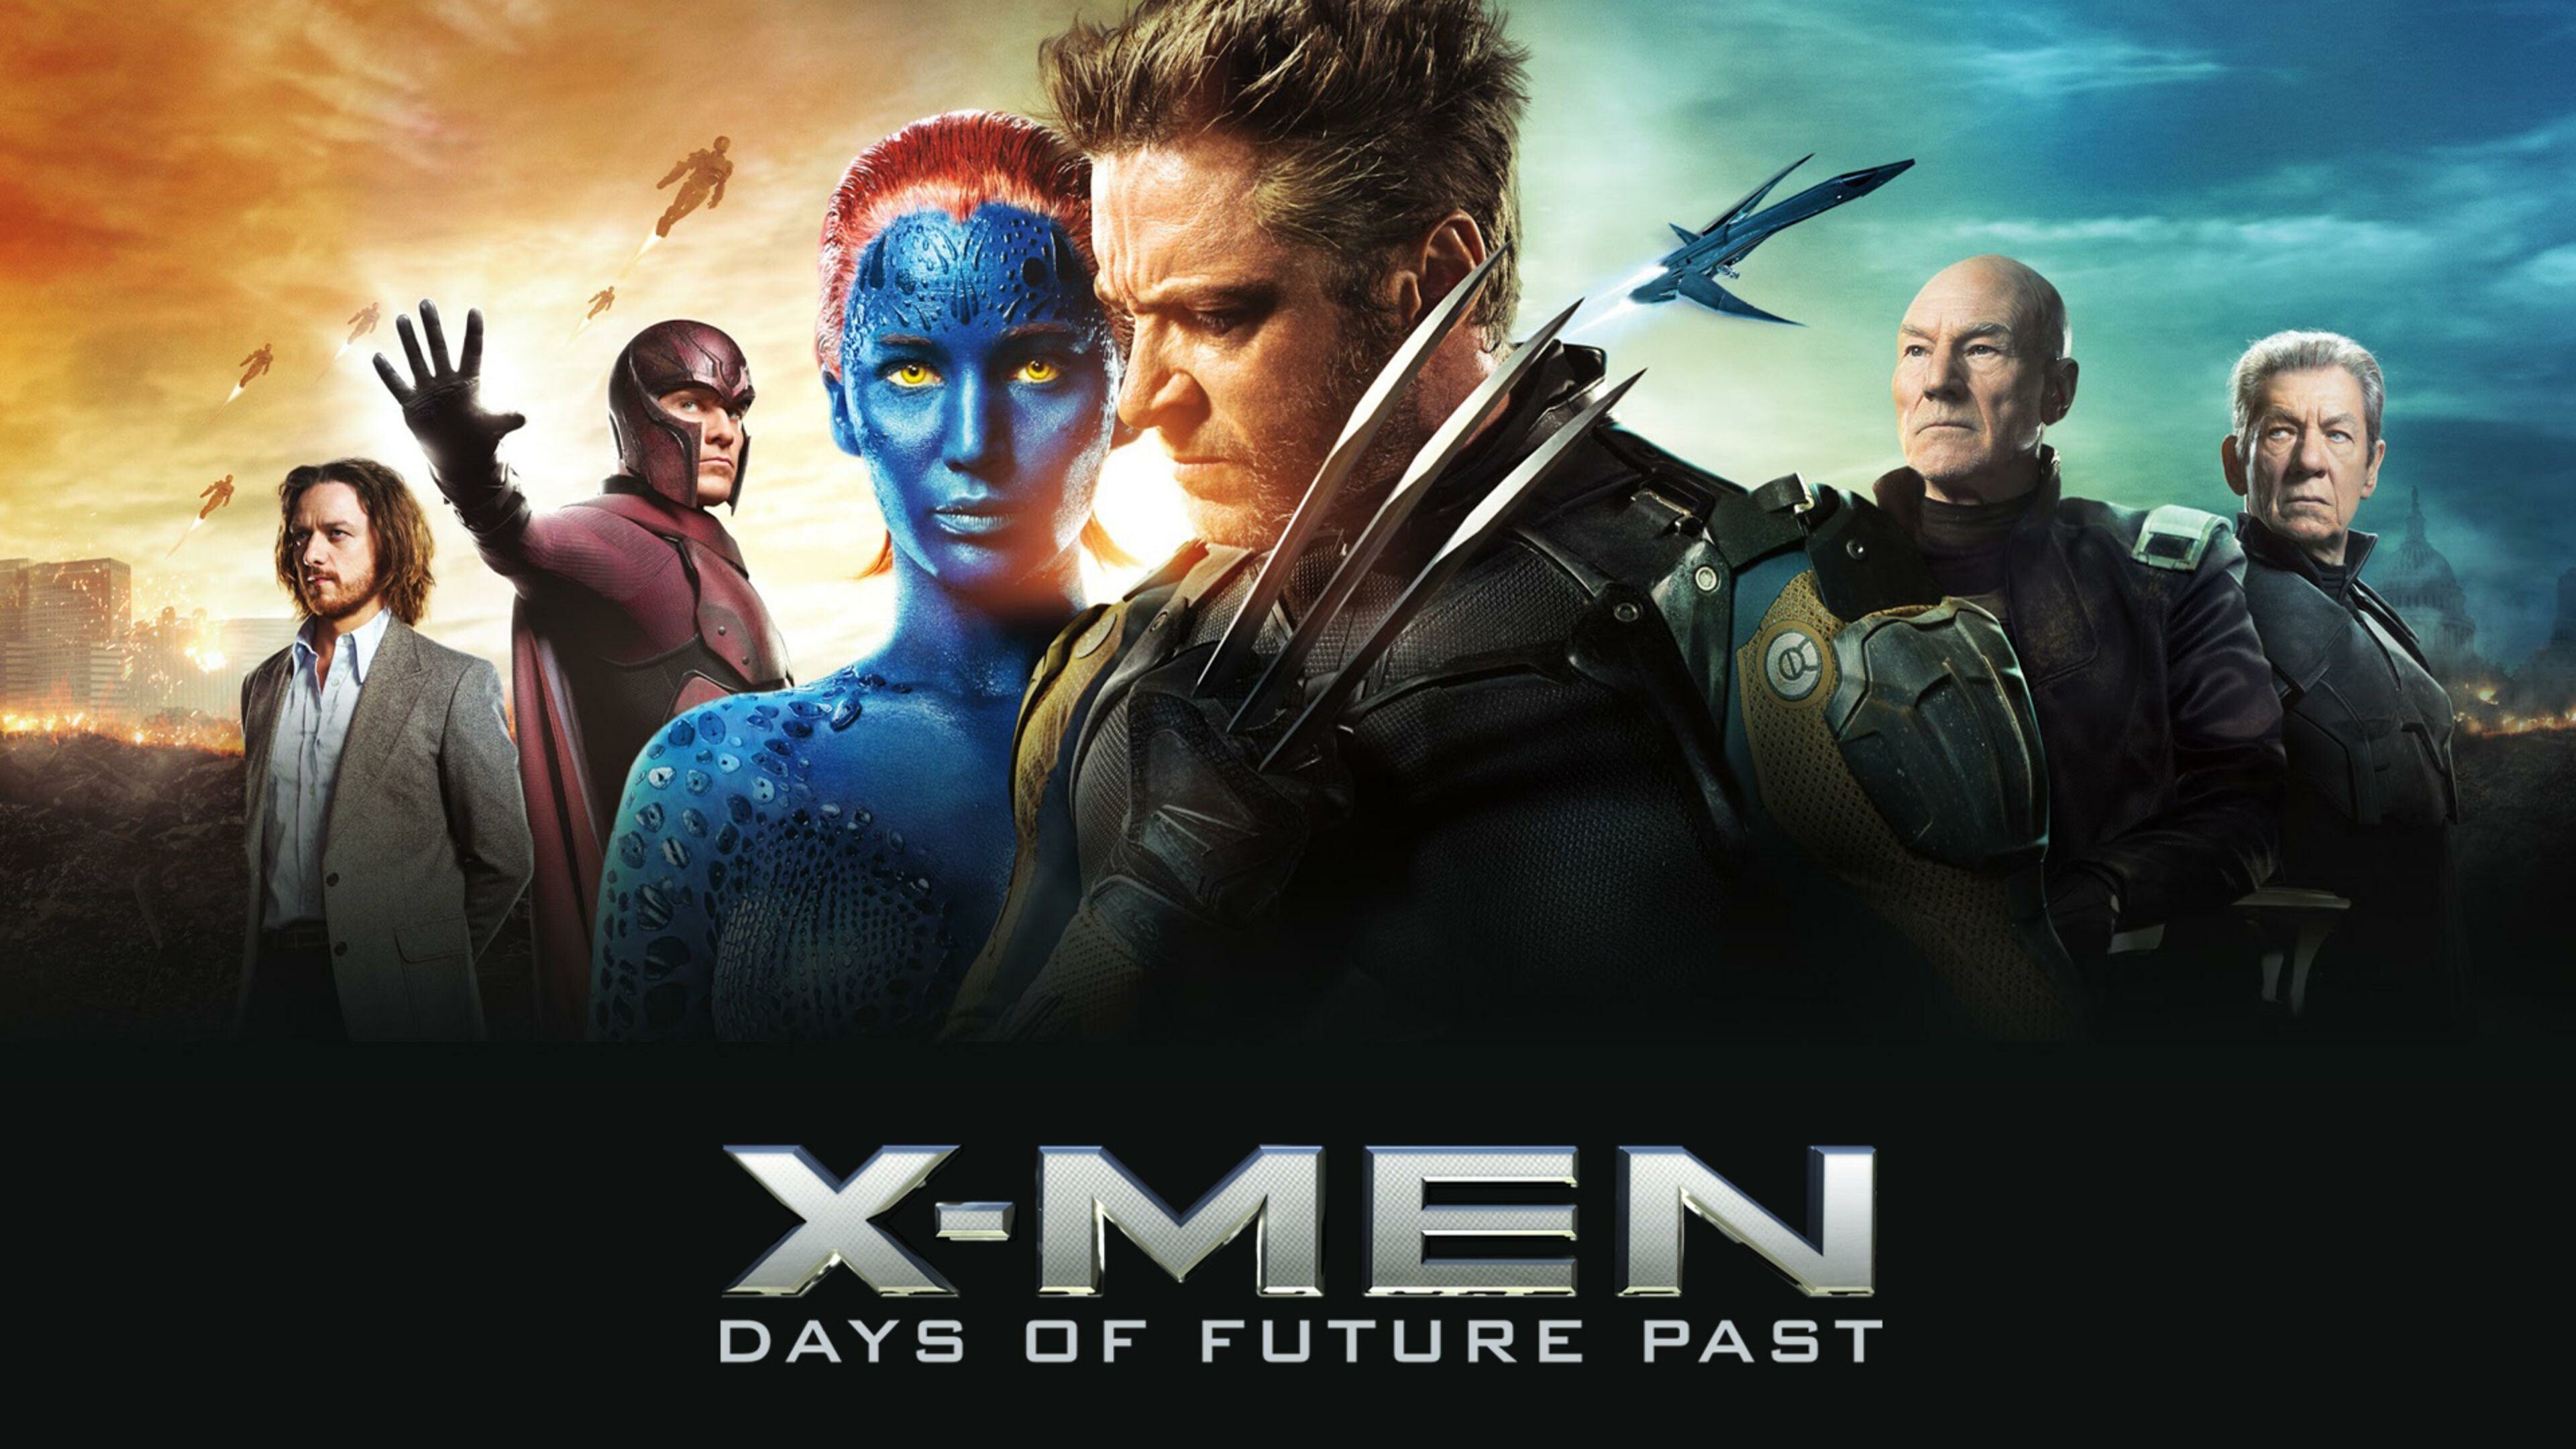 X-Men: Days of Future Past, Directed and produced by Bryan Singer. 3840x2160 4K Wallpaper.